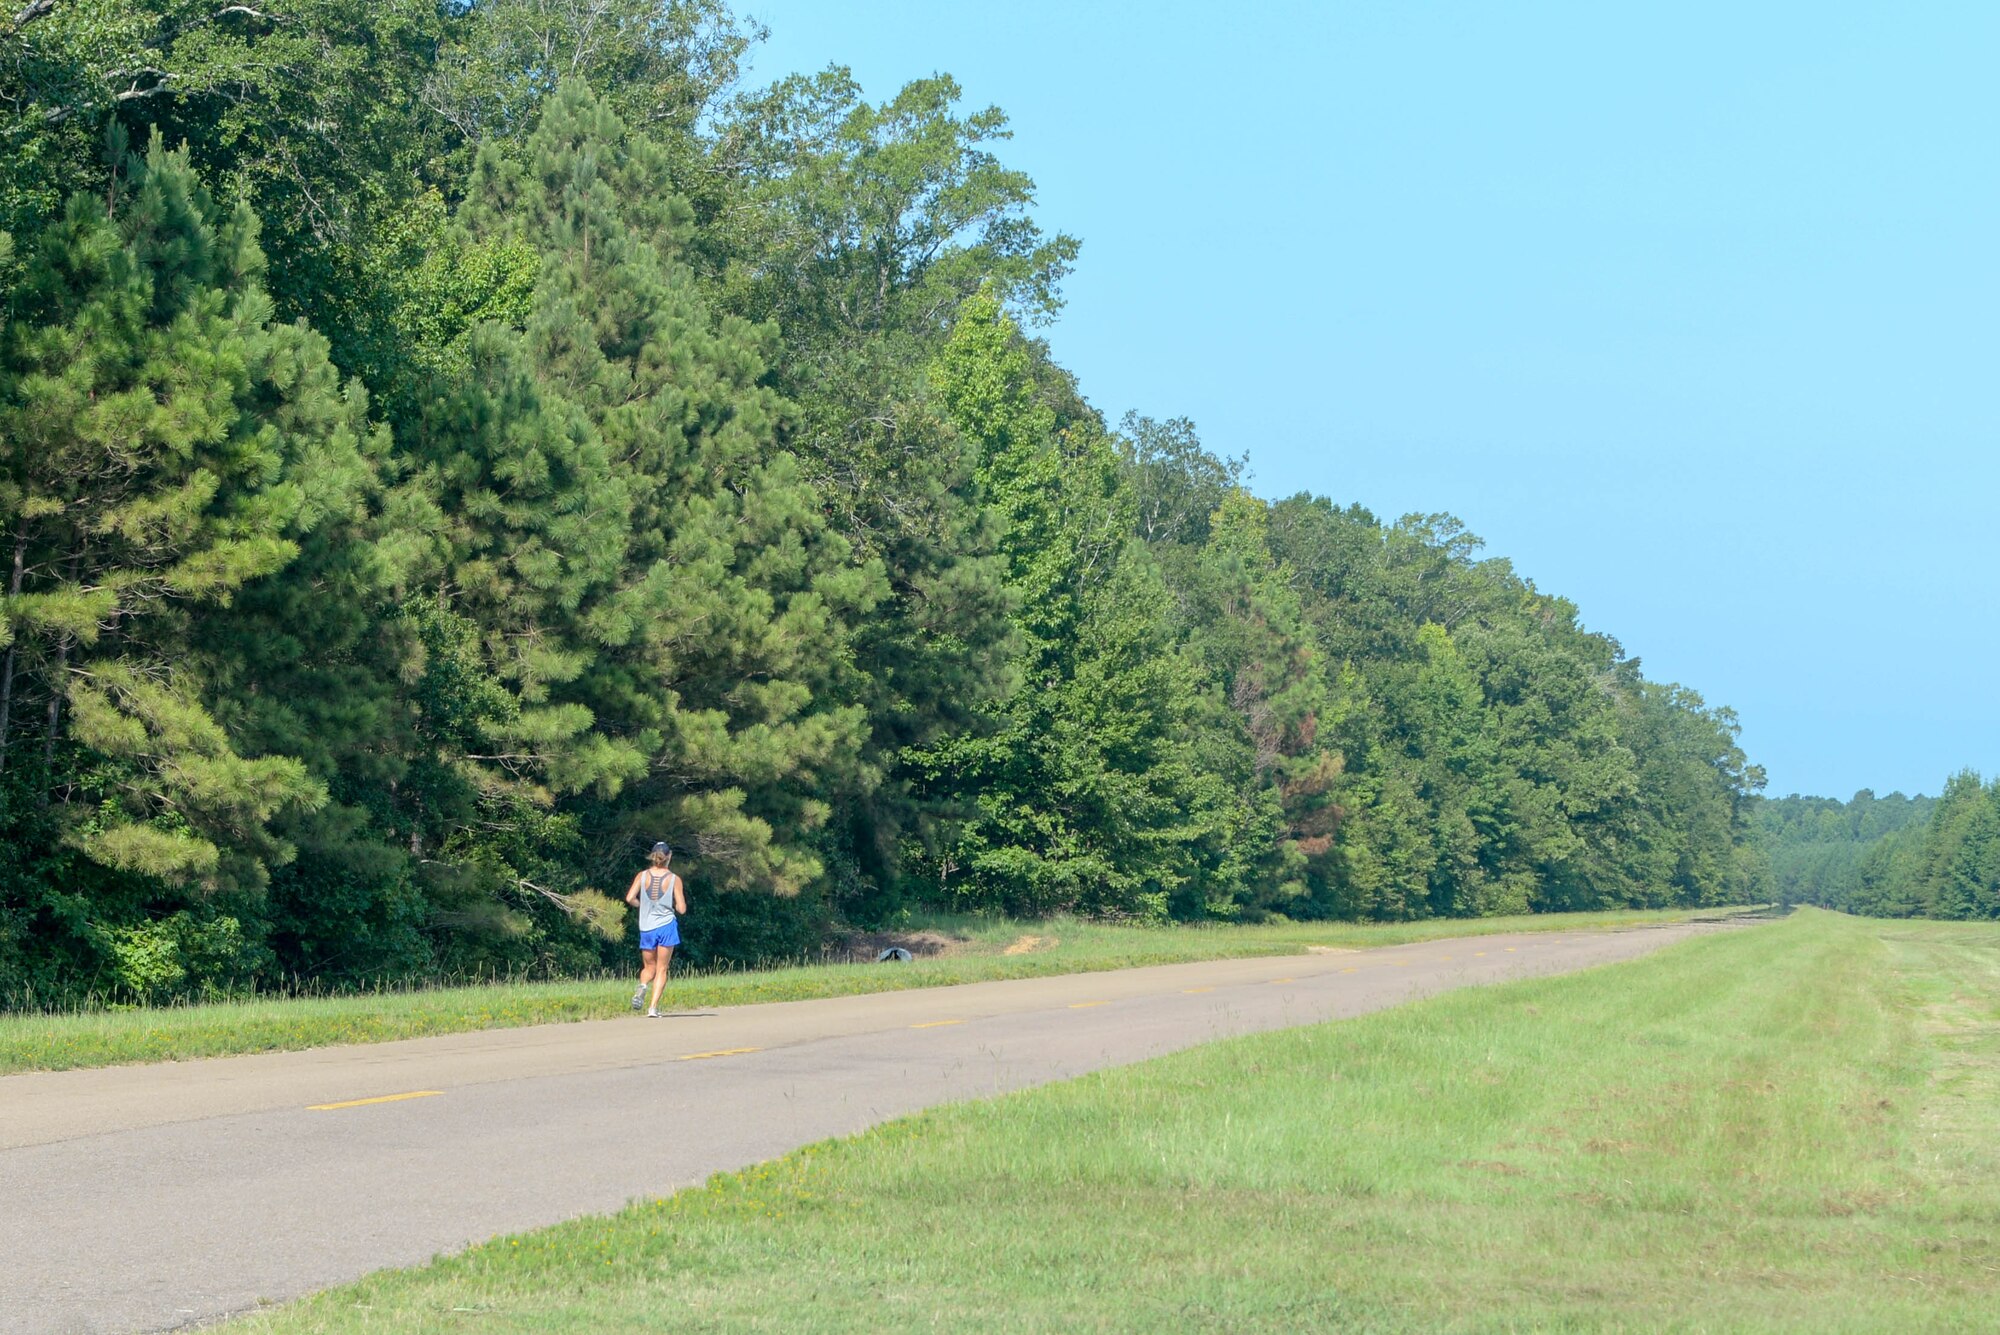 A person runs on Perimeter Road on August 5, 2020, at Columbus Air Force Base, Miss. For a more fun and less strenuous form of exercise, Floyd said members should use the fitness center’s tennis and basketball courts, and the Frisbee golf course across from the fitness center. (U.S. Air Force photo by Airman 1st Class Davis Donaldson)